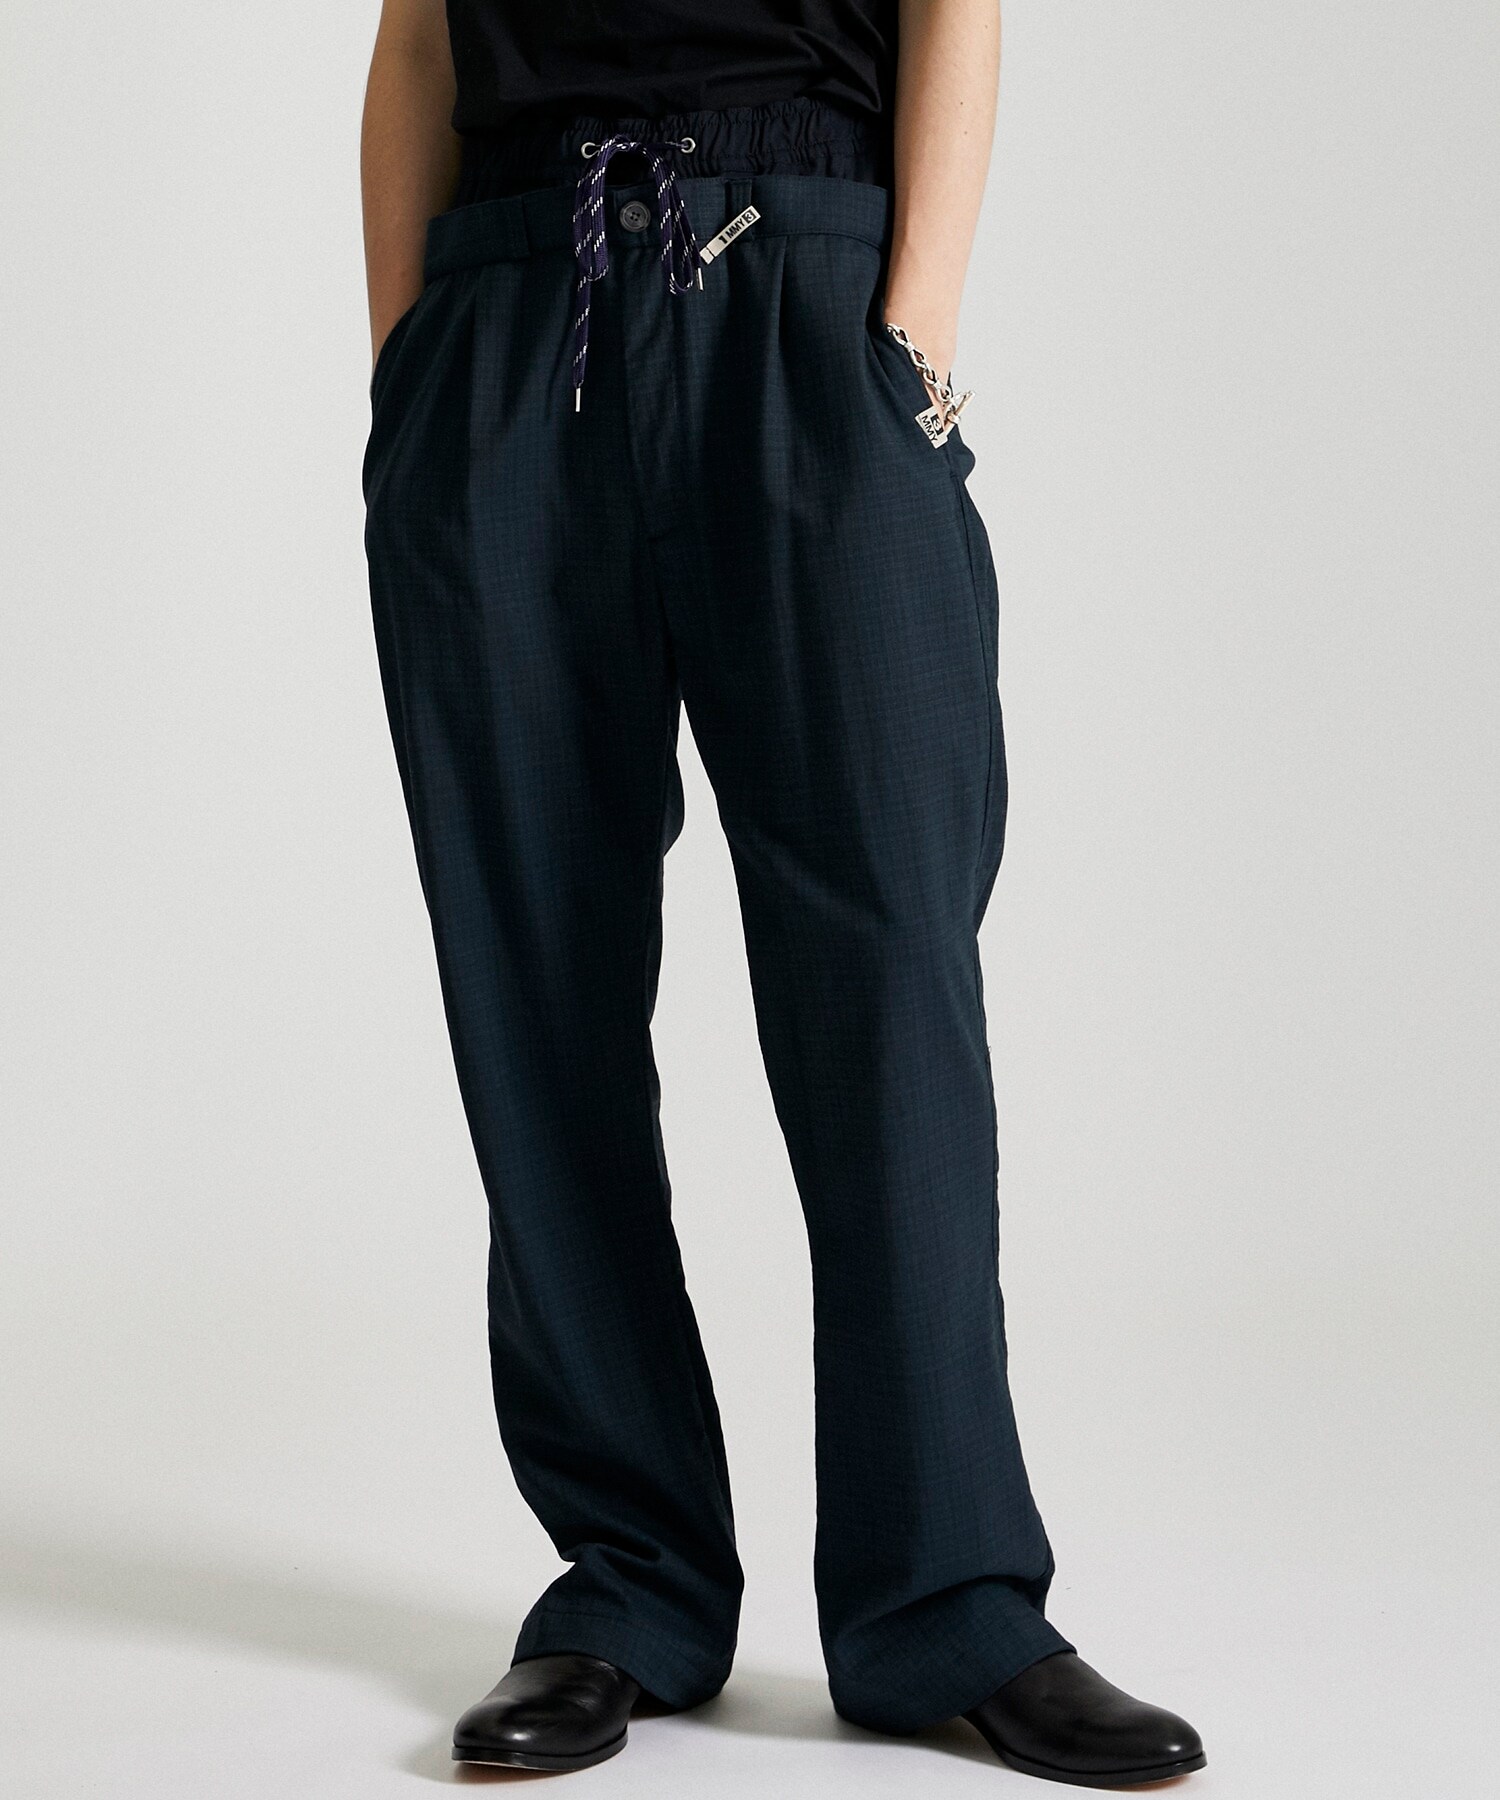 Double Waist Check Trousers